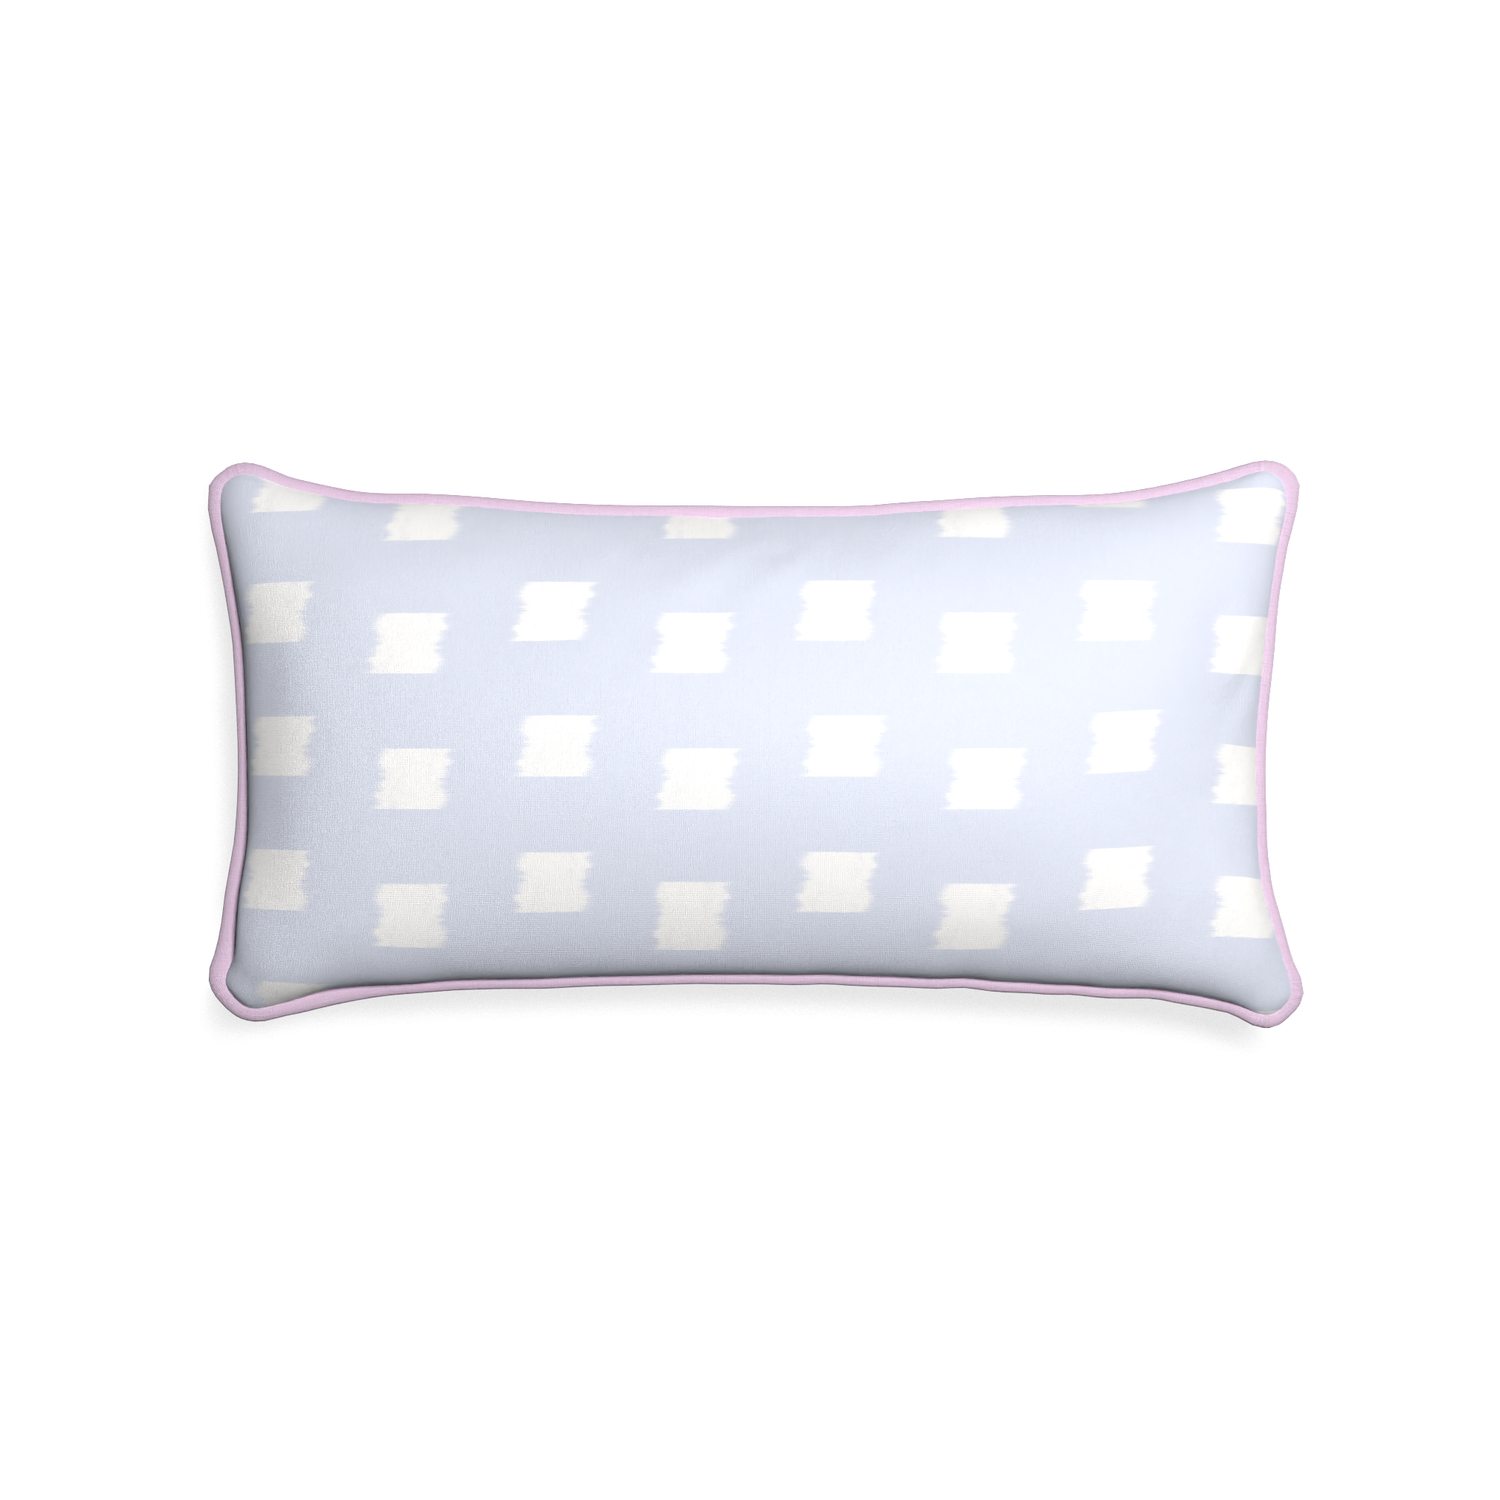 Midi-lumbar denton custom sky blue patternpillow with l piping on white background